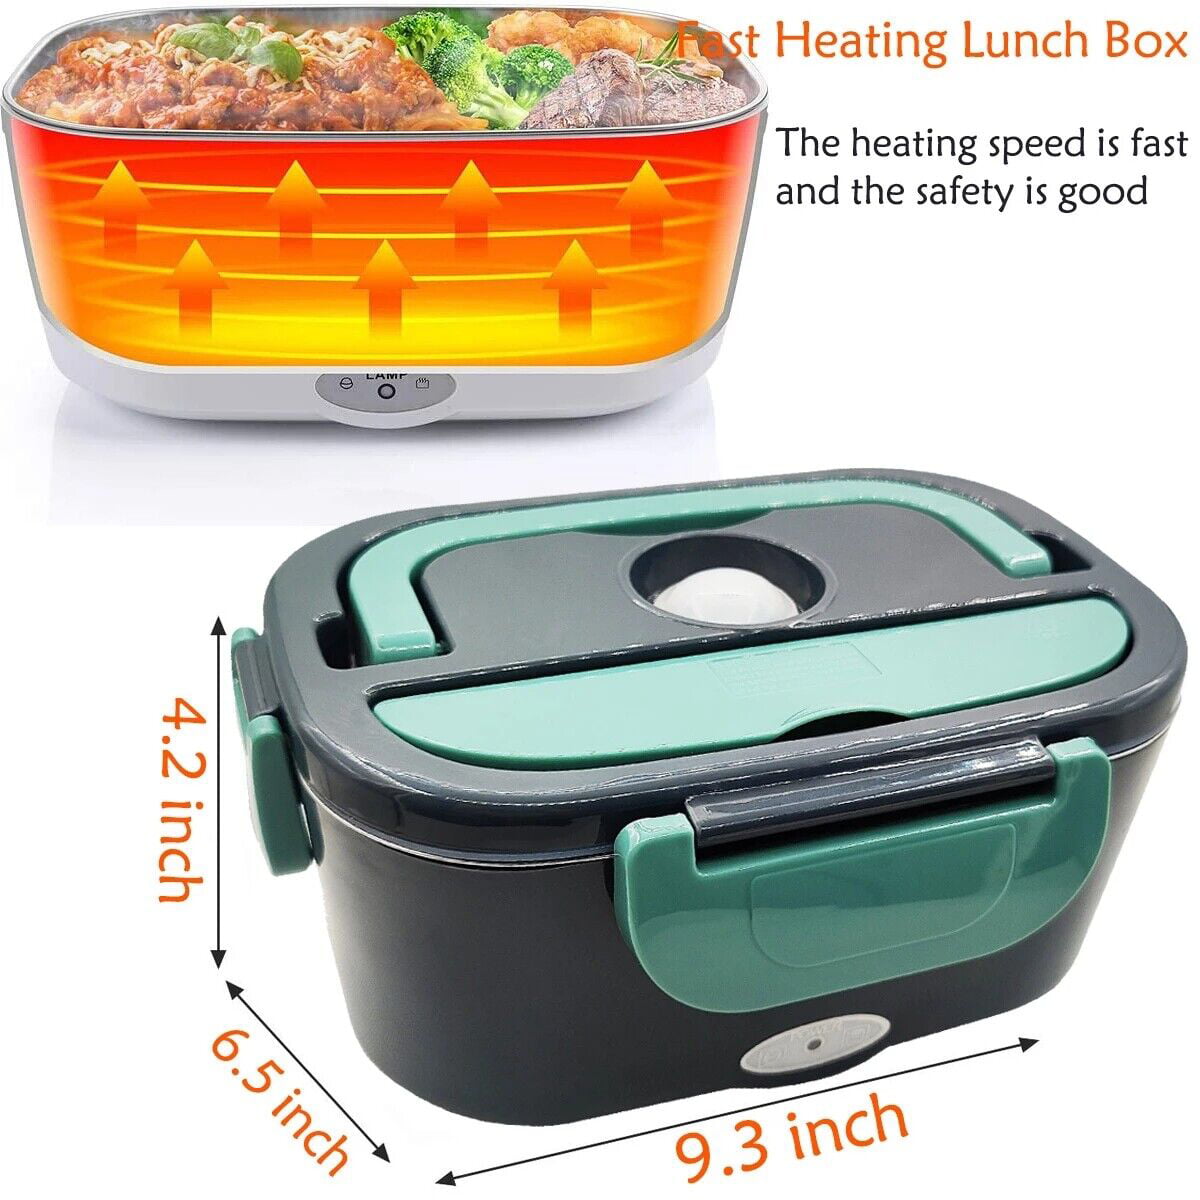 AsFrost Electric Lunch Box for Car, Home, Office - 110V/12V 40W Portable Electric Food Warmer Heater Lunch Box with Food-grade